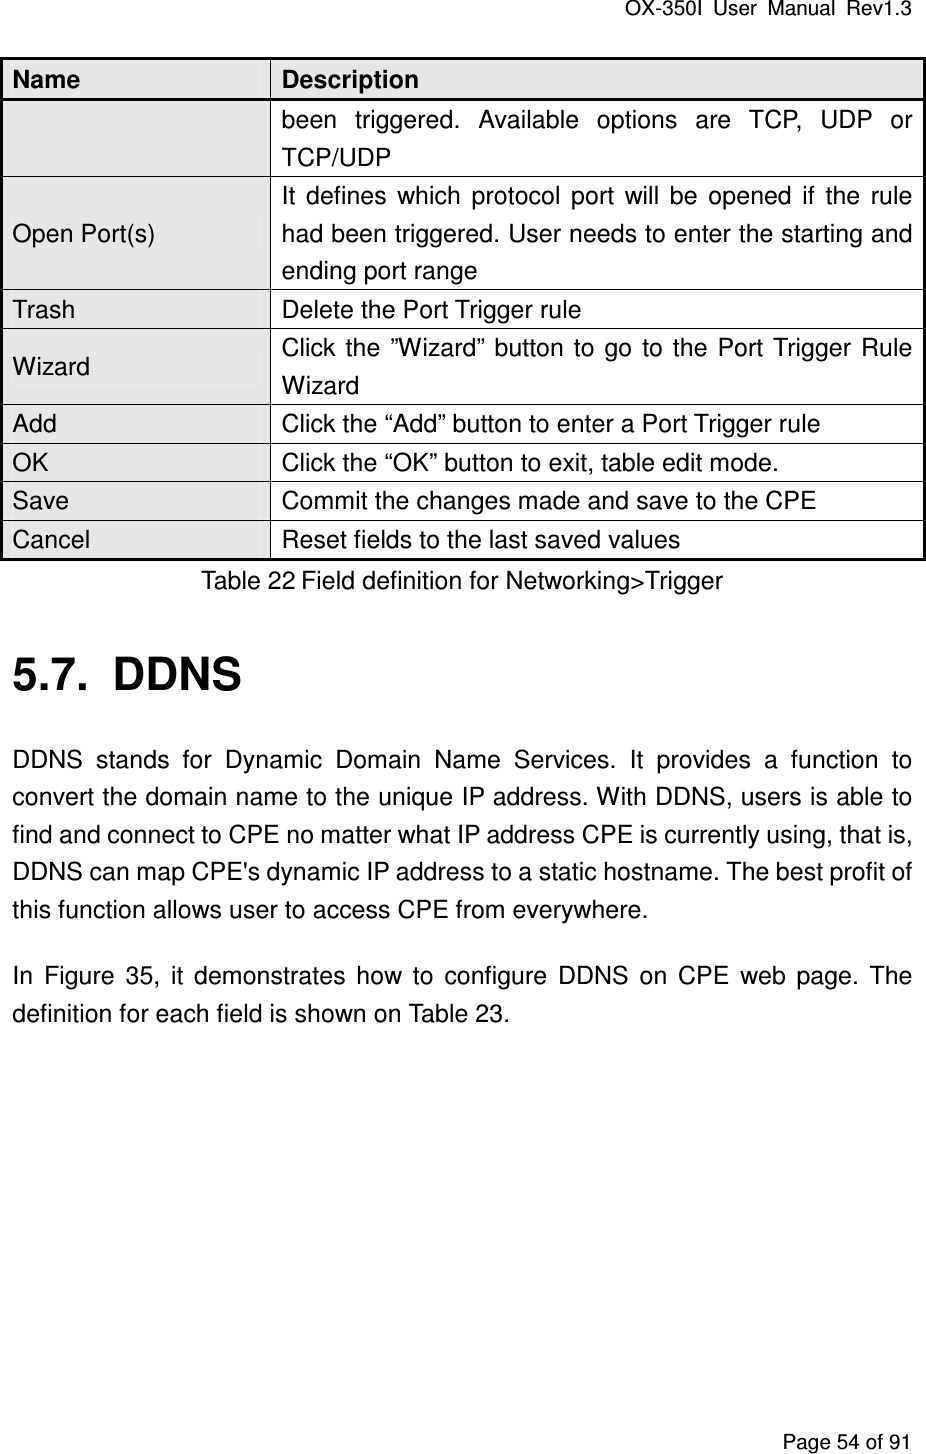 OX-350I  User  Manual  Rev1.3 Page 54 of 91 Name  Description been  triggered.  Available  options  are  TCP,  UDP  or TCP/UDP Open Port(s) It  defines  which  protocol  port  will  be  opened  if  the  rule had been triggered. User needs to enter the starting and ending port range Trash  Delete the Port Trigger rule Wizard  Click  the  ”Wizard” button to go to the  Port Trigger Rule Wizard Add  Click the “Add” button to enter a Port Trigger rule OK  Click the “OK” button to exit, table edit mode. Save  Commit the changes made and save to the CPE Cancel  Reset fields to the last saved values Table 22 Field definition for Networking&gt;Trigger 5.7.  DDNS DDNS  stands  for  Dynamic  Domain  Name  Services.  It  provides  a  function  to convert the domain name to the unique IP address. With DDNS, users is able to find and connect to CPE no matter what IP address CPE is currently using, that is, DDNS can map CPE&apos;s dynamic IP address to a static hostname. The best profit of this function allows user to access CPE from everywhere. In  Figure  35,  it  demonstrates  how  to  configure  DDNS  on  CPE  web  page.  The definition for each field is shown on Table 23. 